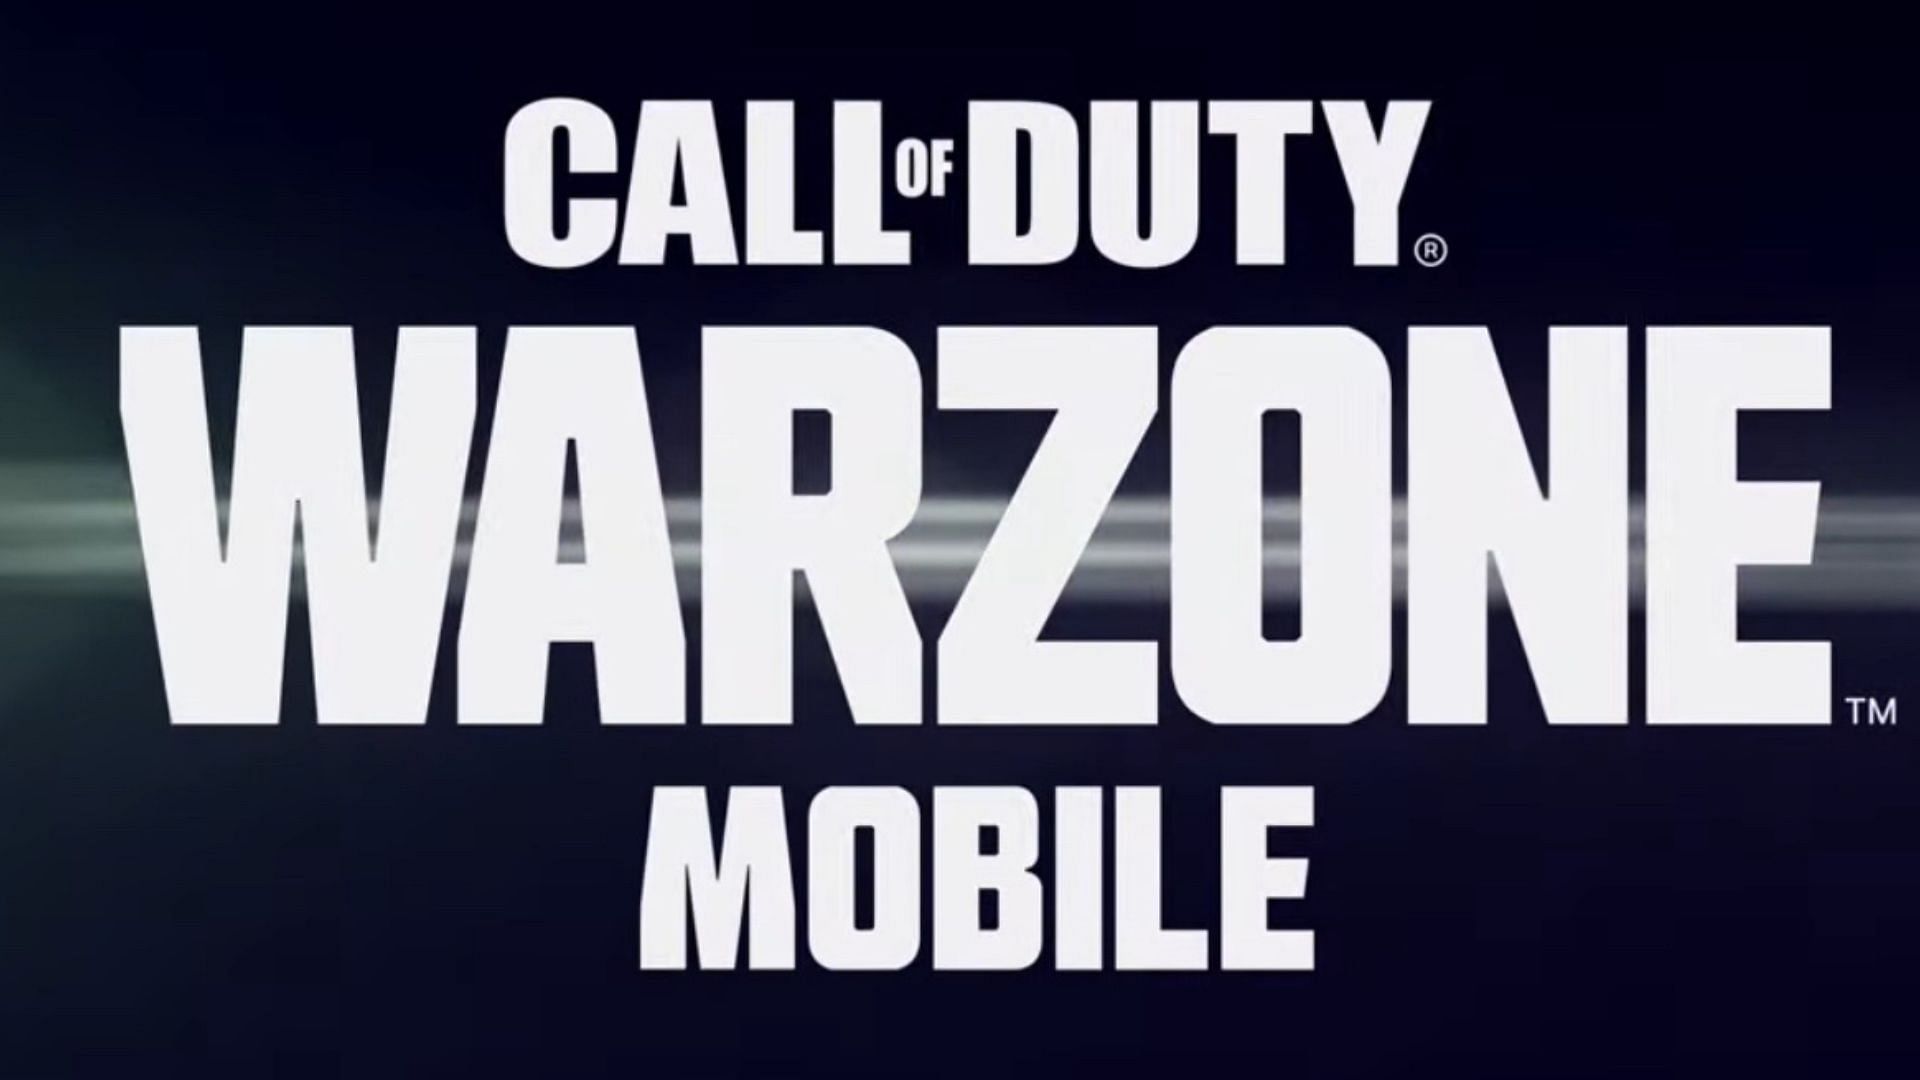 NEW* Warzone Mobile Download! New Gameplay + Beta Test & more! Warzone  Mobile Release Date 